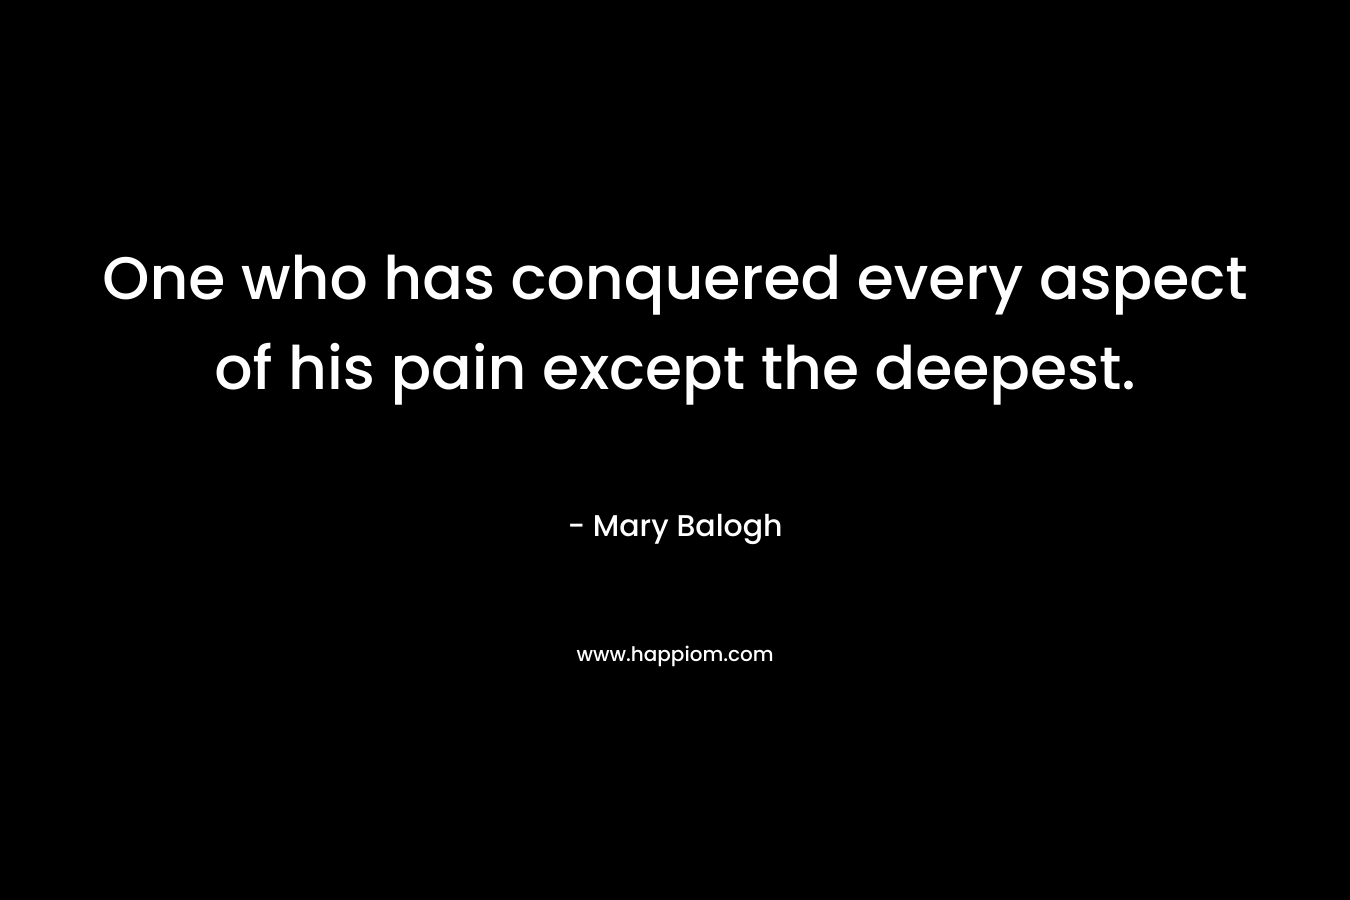 One who has conquered every aspect of his pain except the deepest. – Mary Balogh